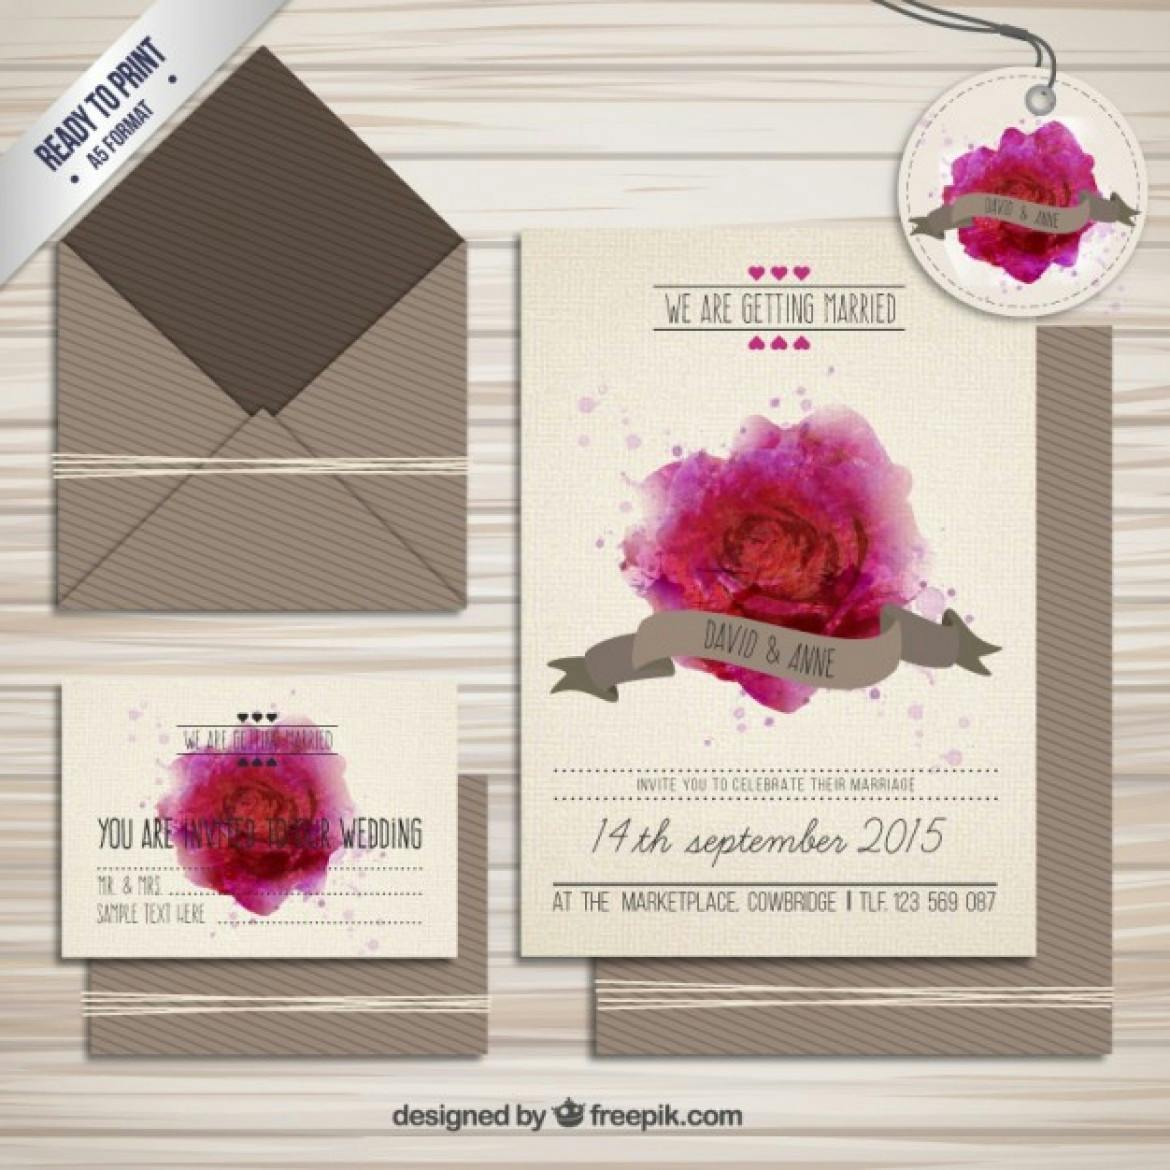 wpid-wedding-invitation-with-watercolor-rose_23-2147508465-1170x1170